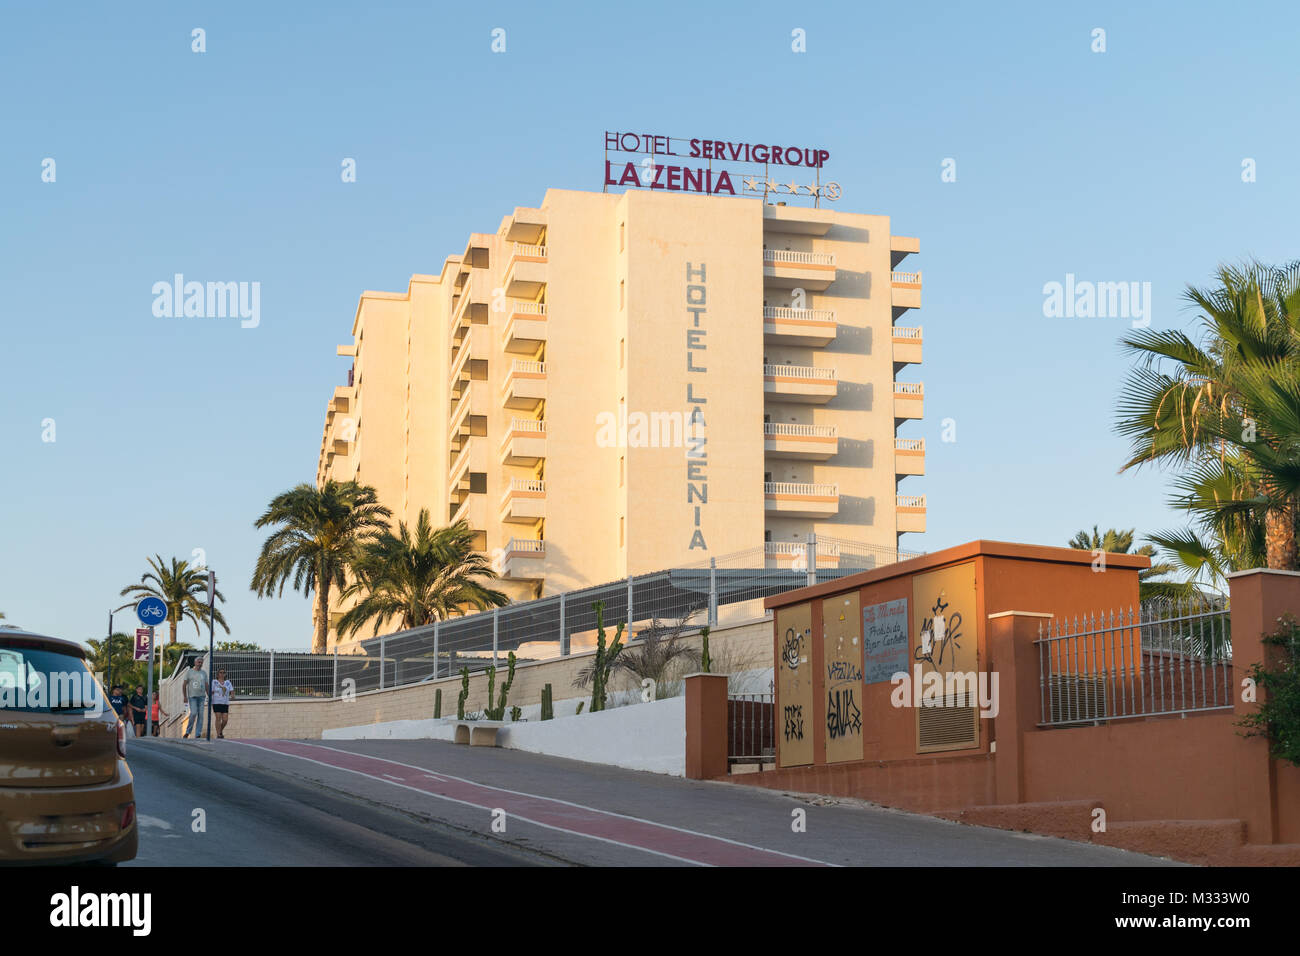 La Zenia Beach High Resolution Stock Photography and Images - Alamy